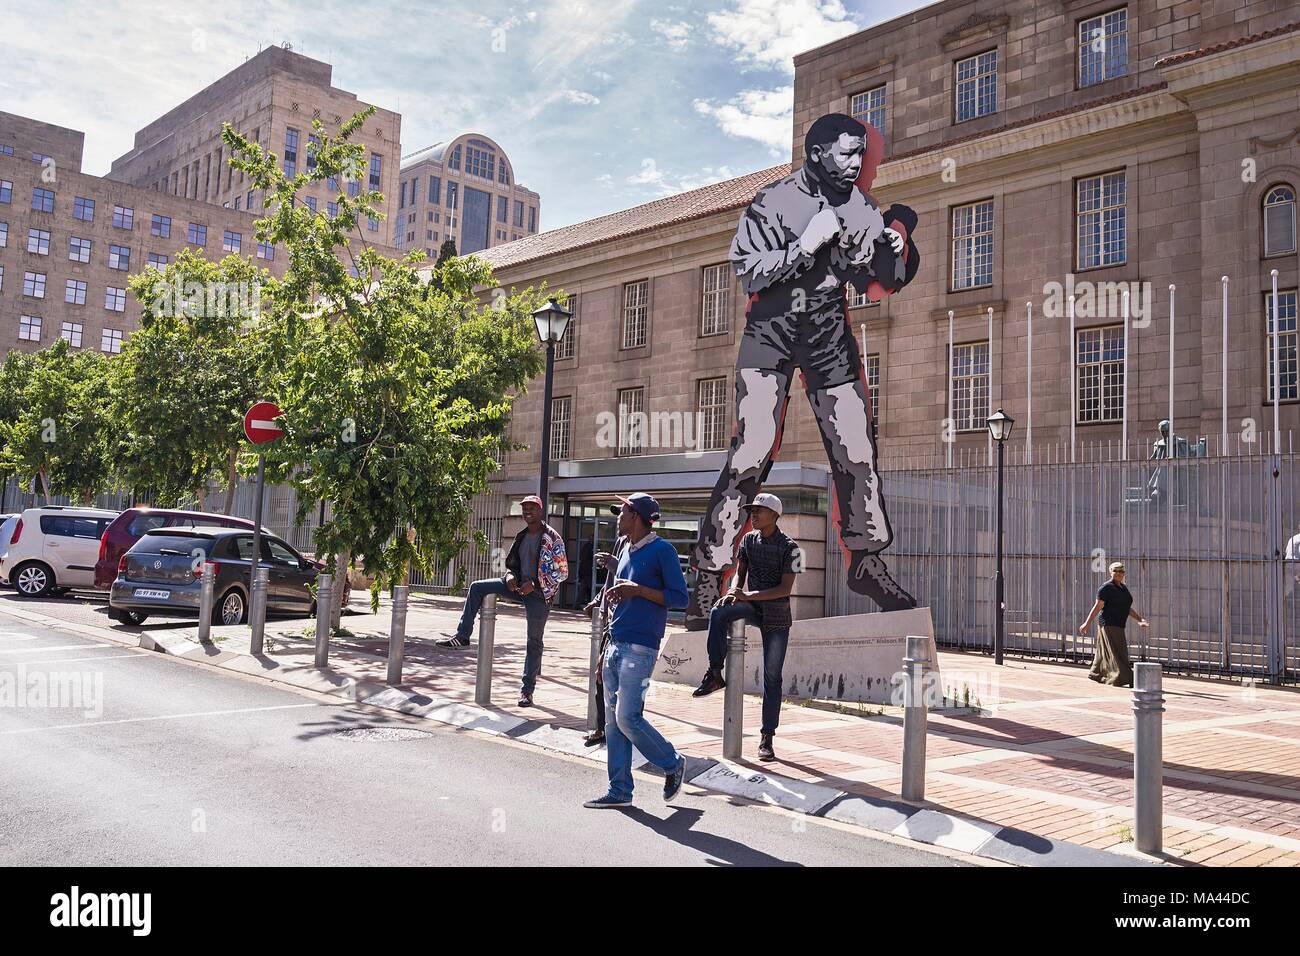 'The Shadow Boxer' sculpture by artist Marco Cianfanelli in front of the local court in the artist quarter of Maboneng in Johannesburg, South Africa Stock Photo